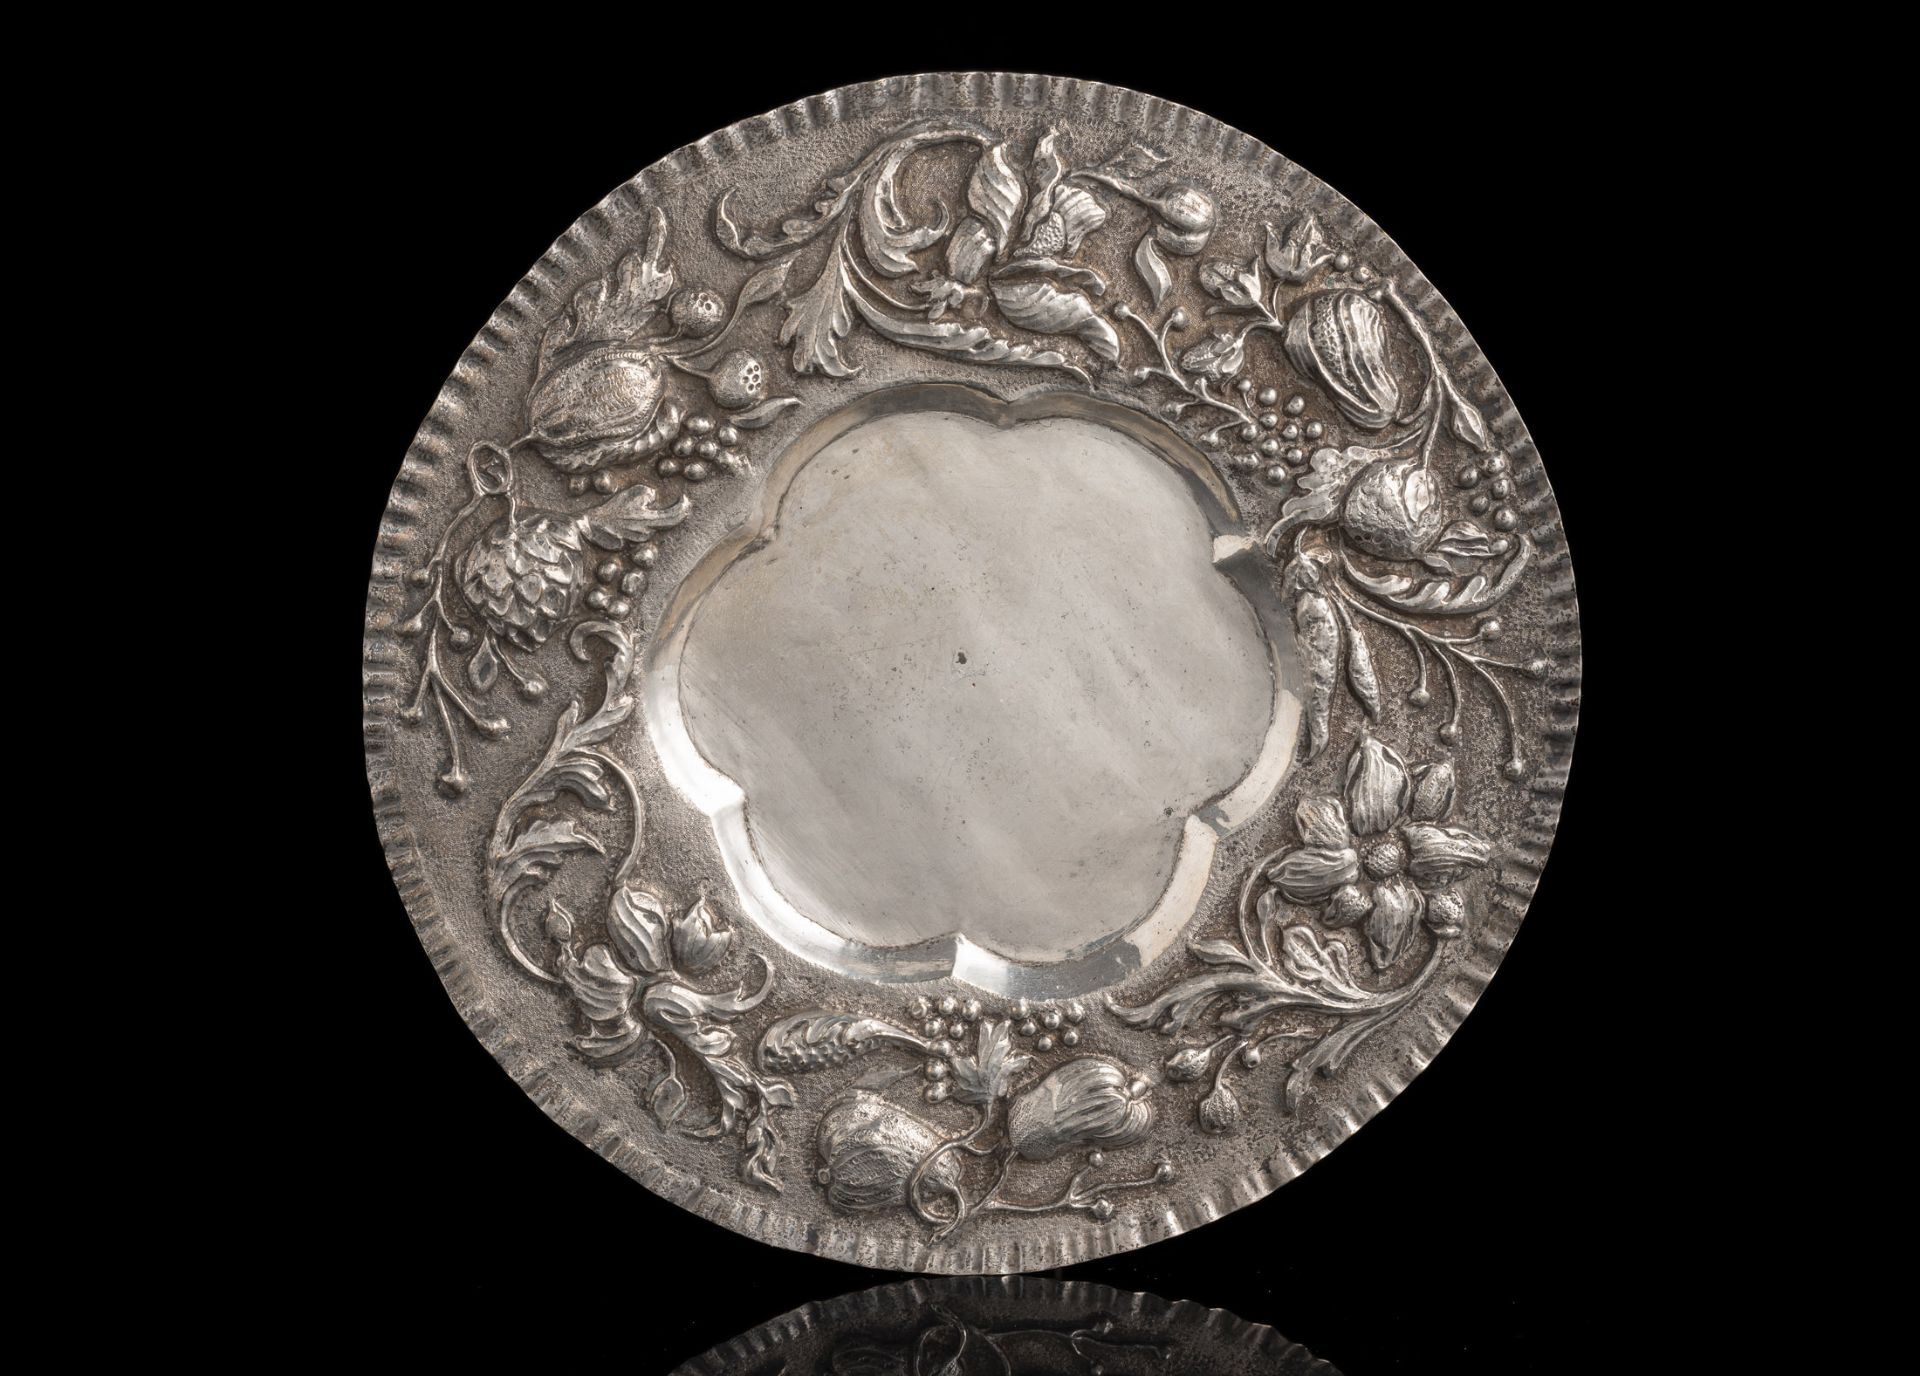 A SILVER ROUND DISH WITH FRUIT DECOR